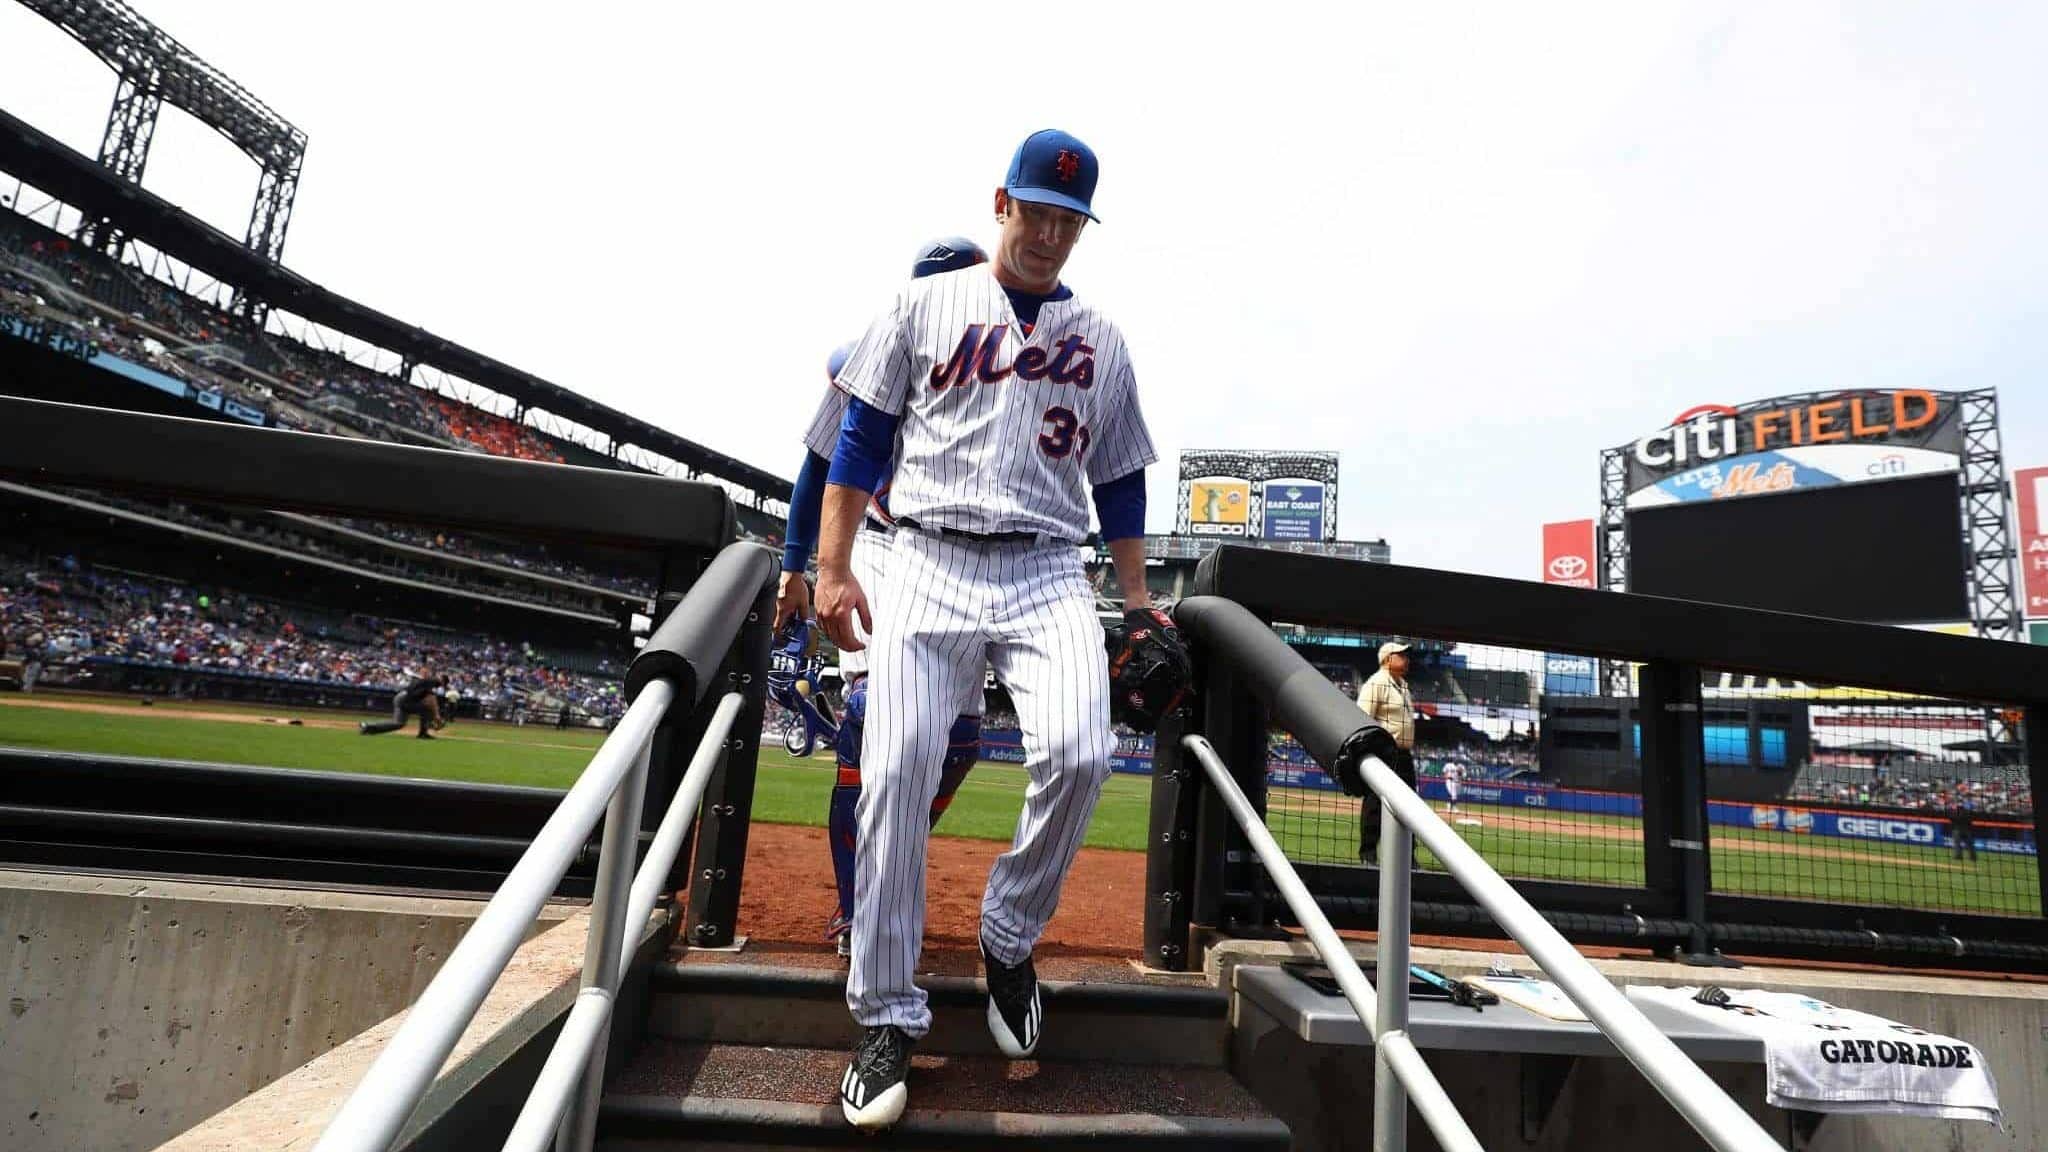 NEW YORK, NY - APRIL 27: Matt Harvey #33 of the New York Mets enters the dugout after the third inning against the Atlanta Braves during their game at Citi Field on April 27, 2017 in New York City.